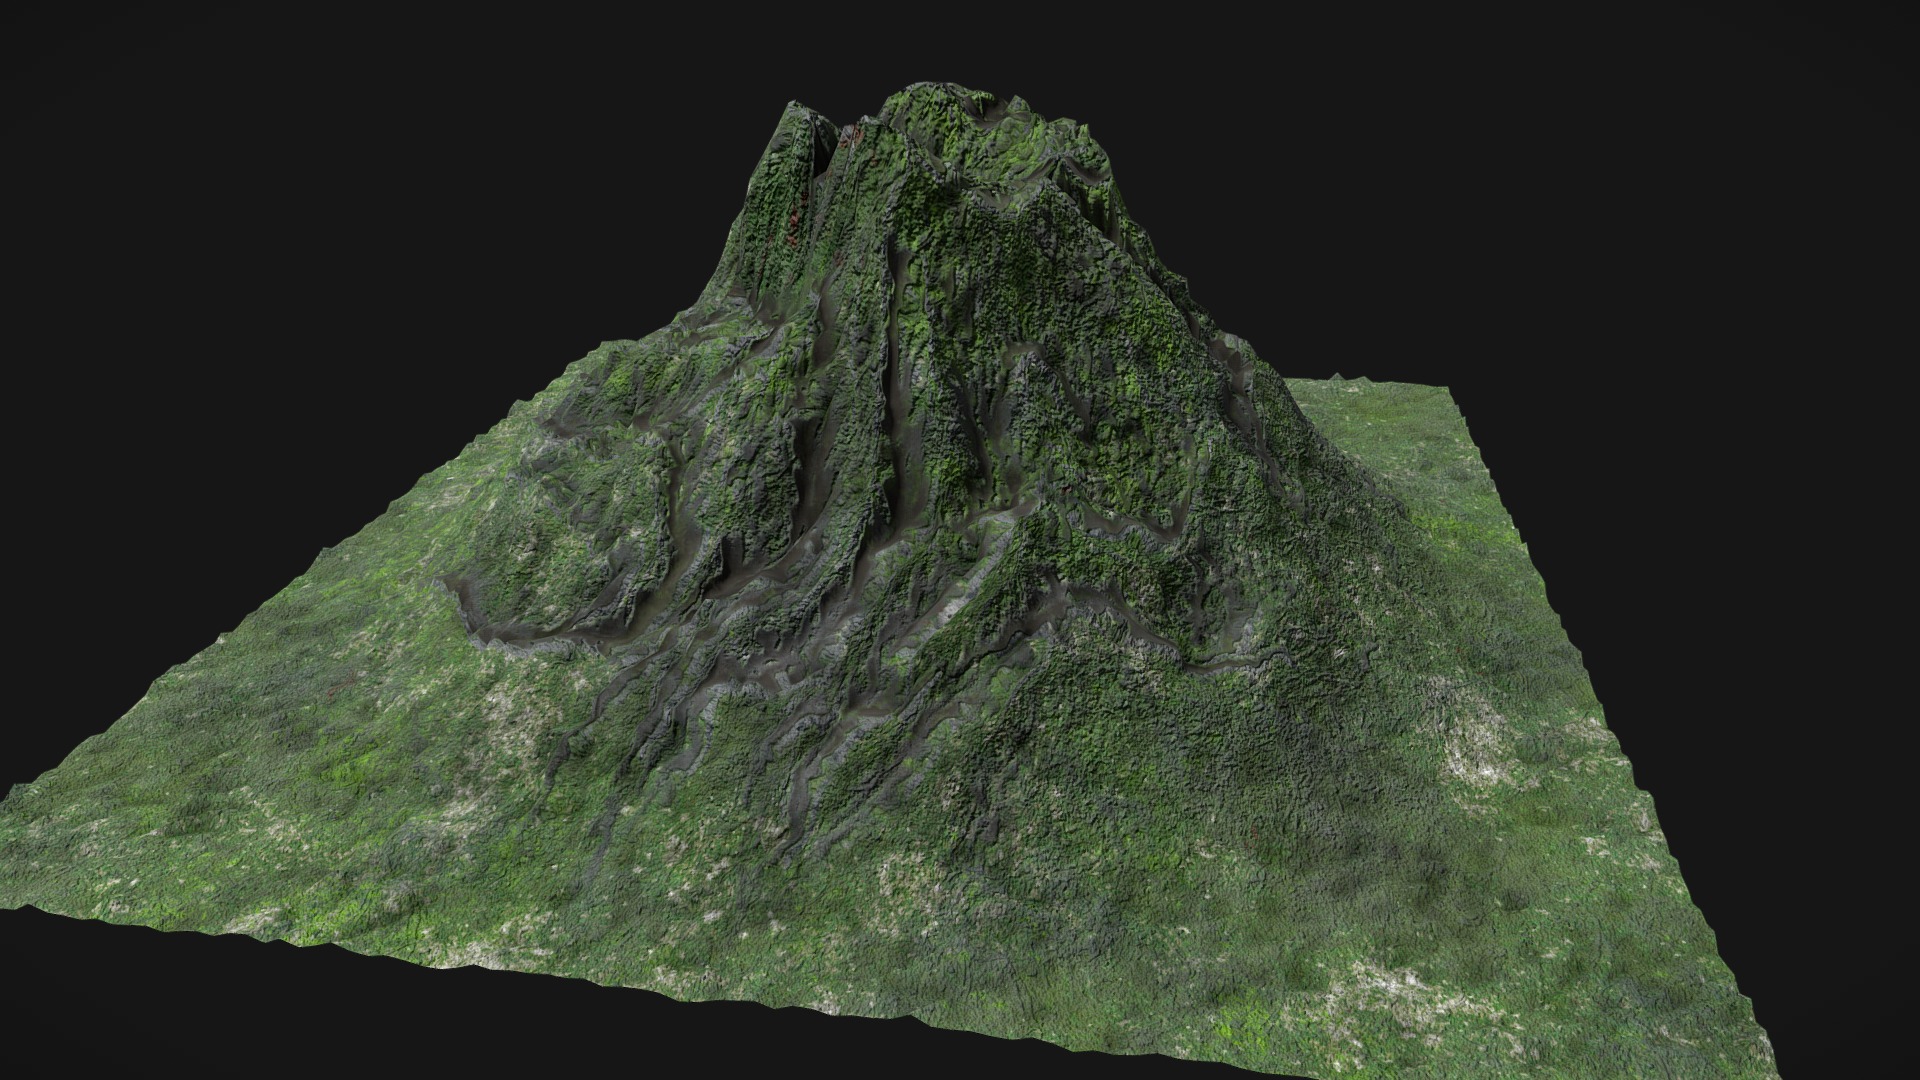 3D model Low poly volcano mountain model - This is a 3D model of the Low poly volcano mountain model. The 3D model is about a green mountain with a dark background.